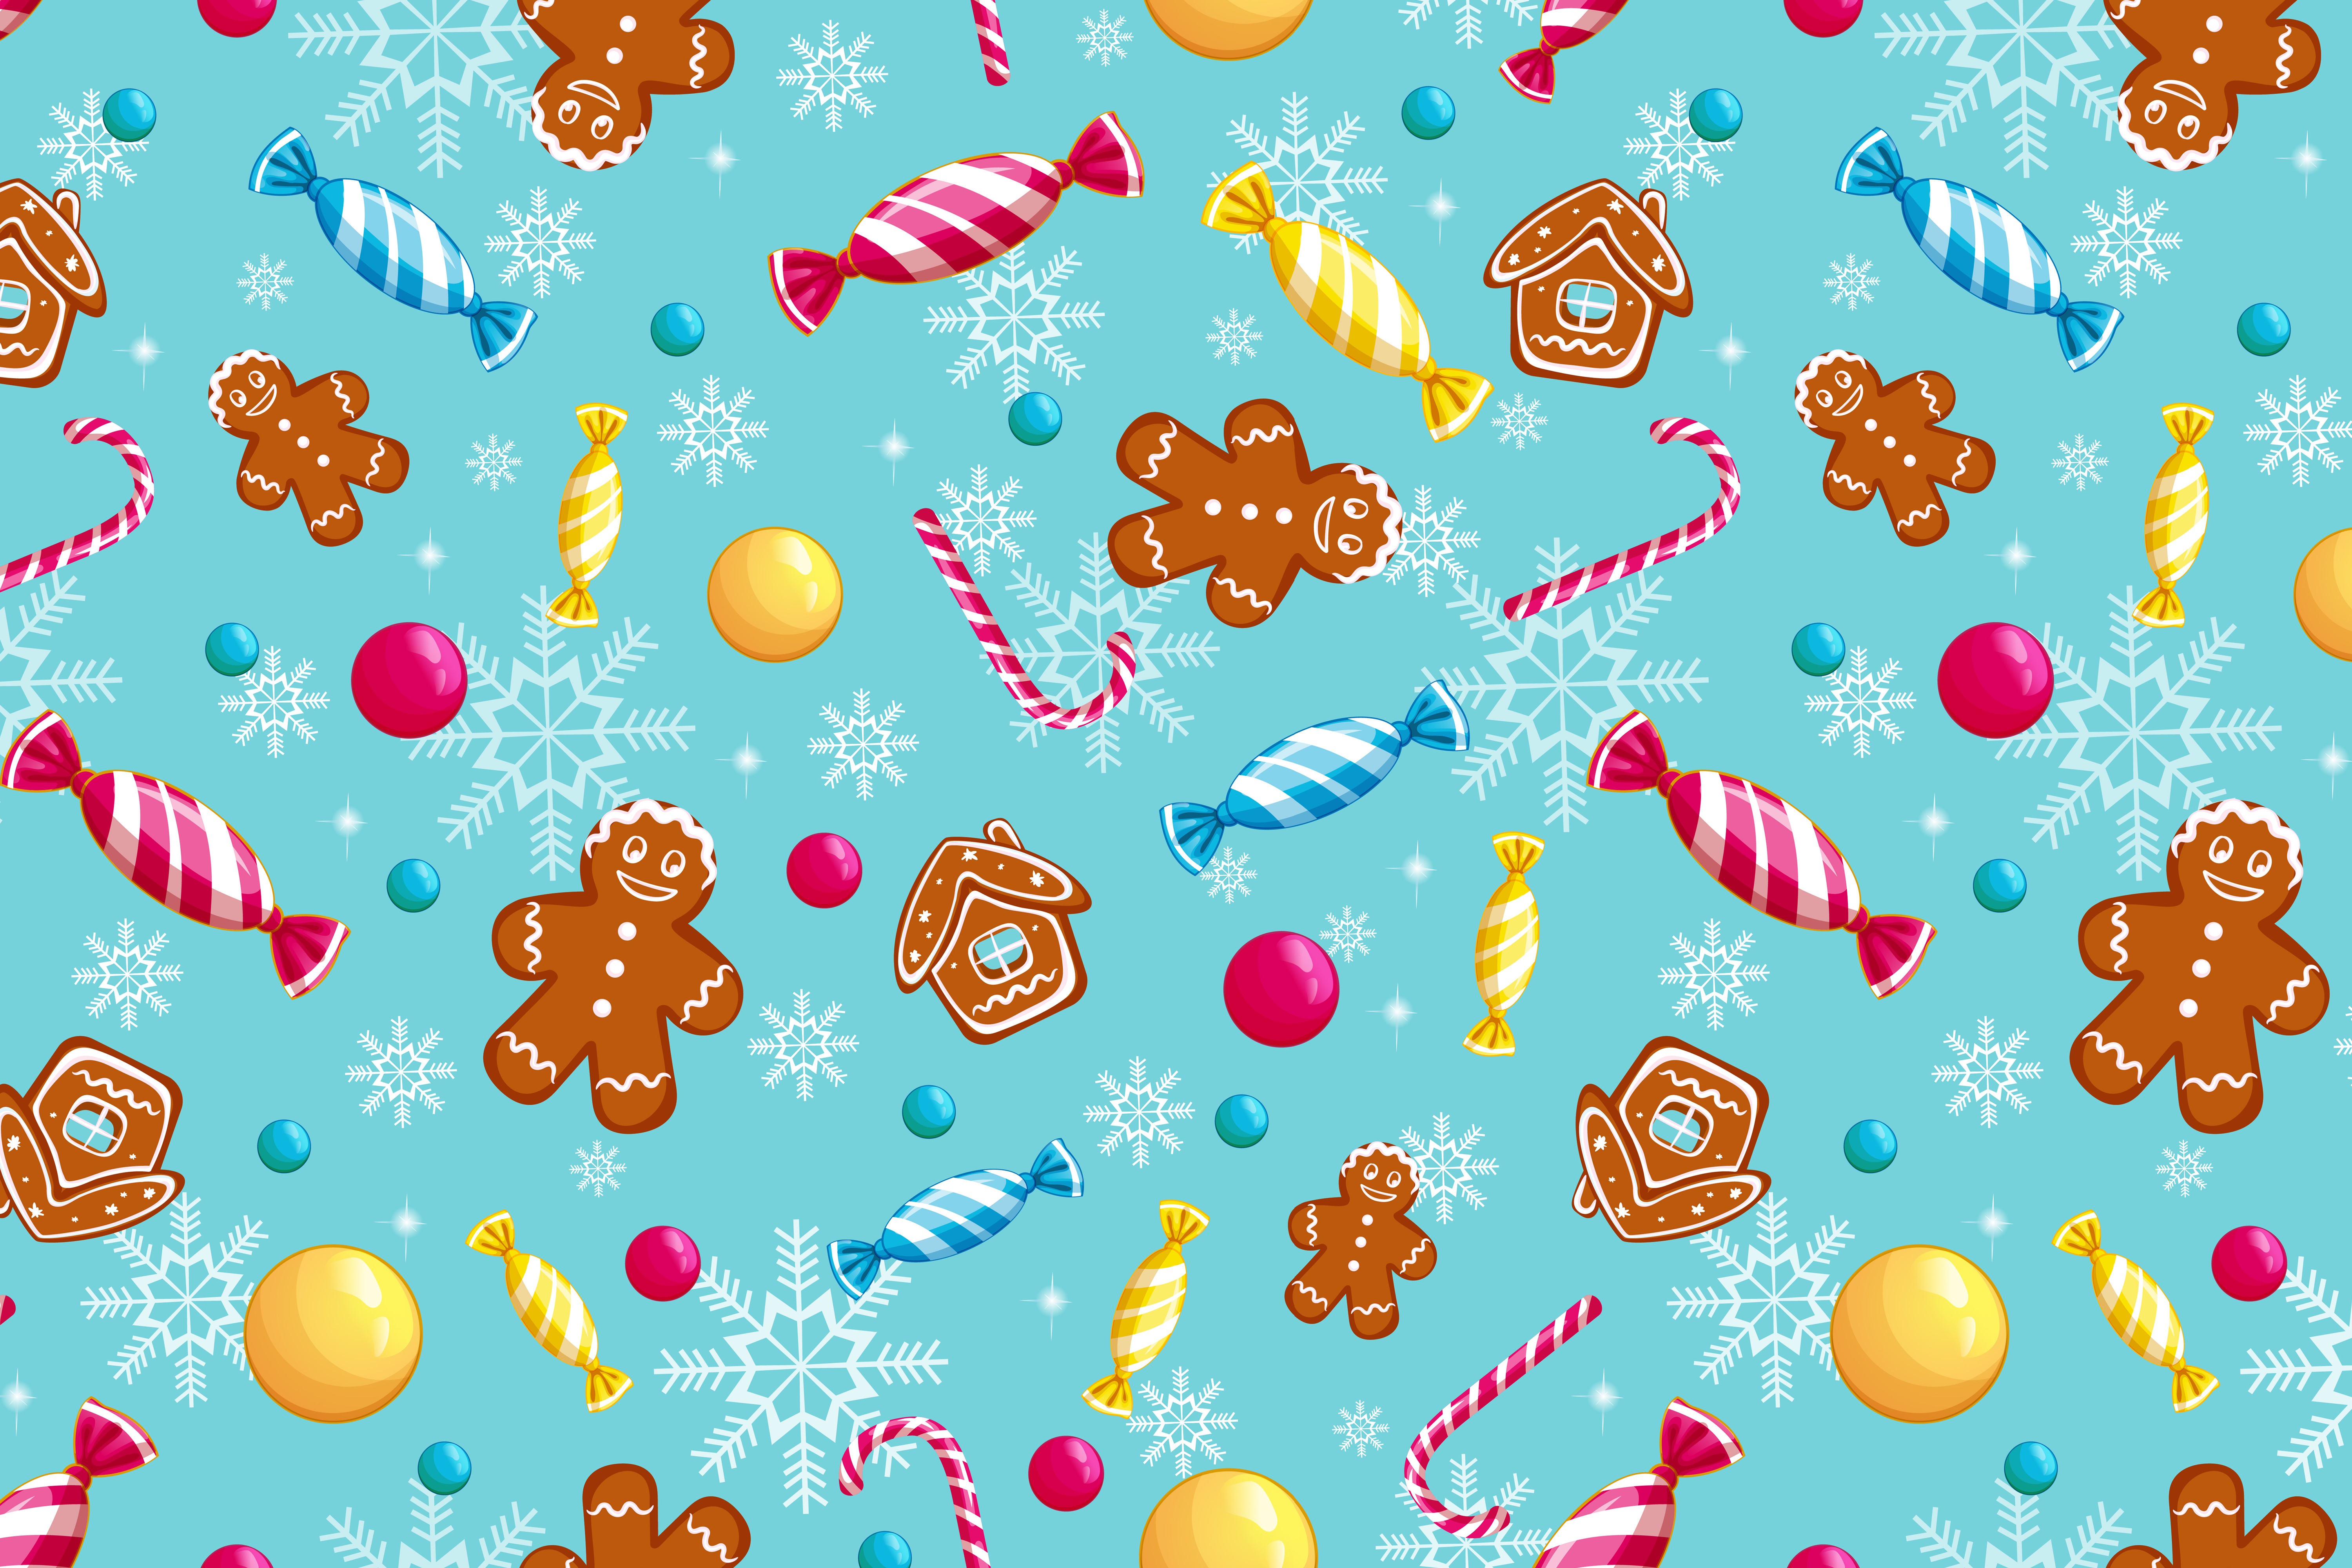 General 6000x4000 gingerbread man candy pattern minimalism sweets Christmas snowflakes candy cane gingerbread house digital art